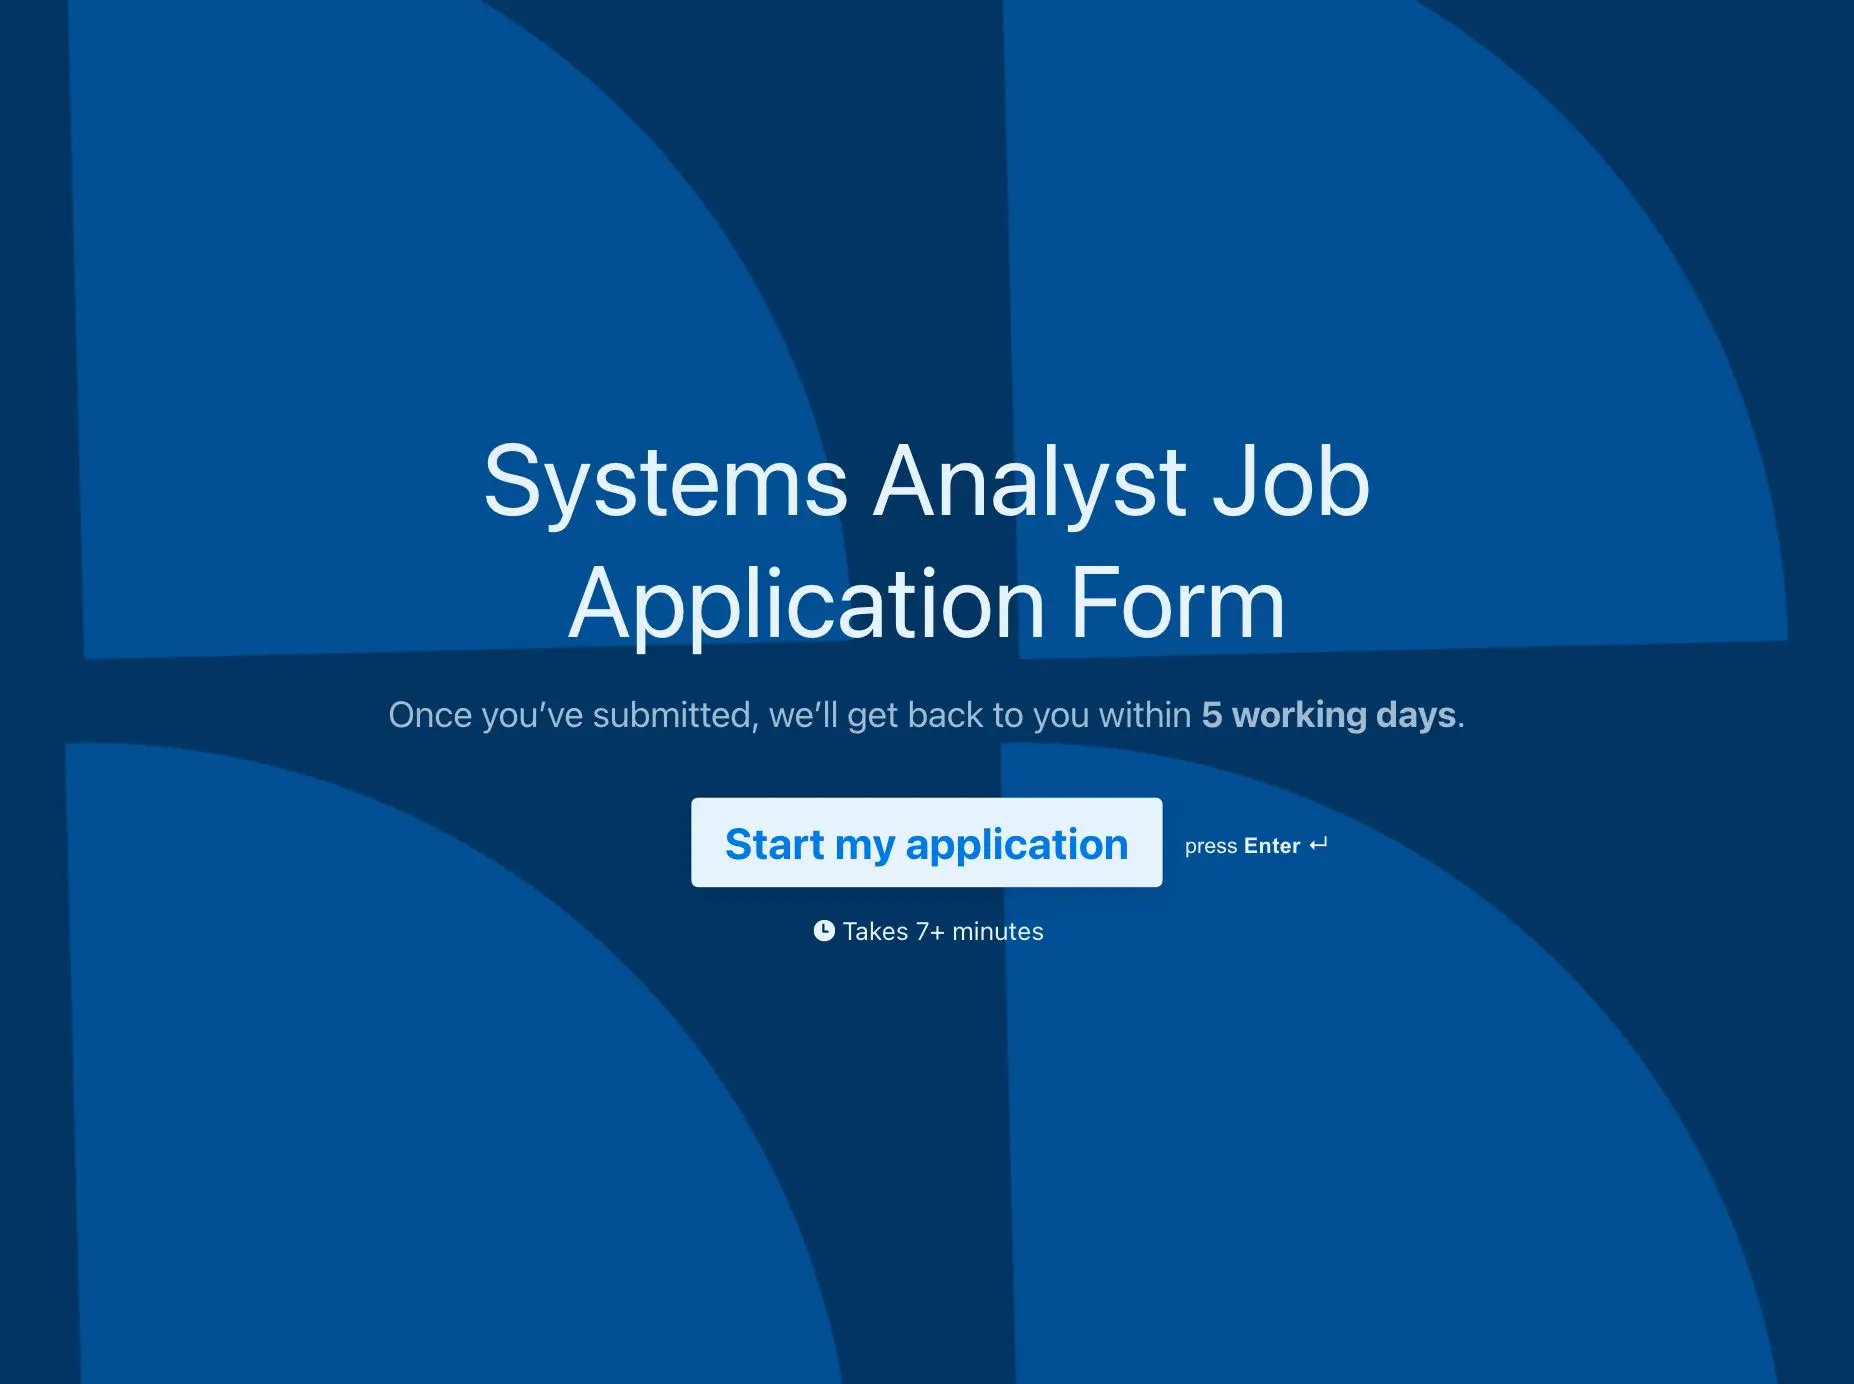 Systems Analyst Job Application Form Template Hero